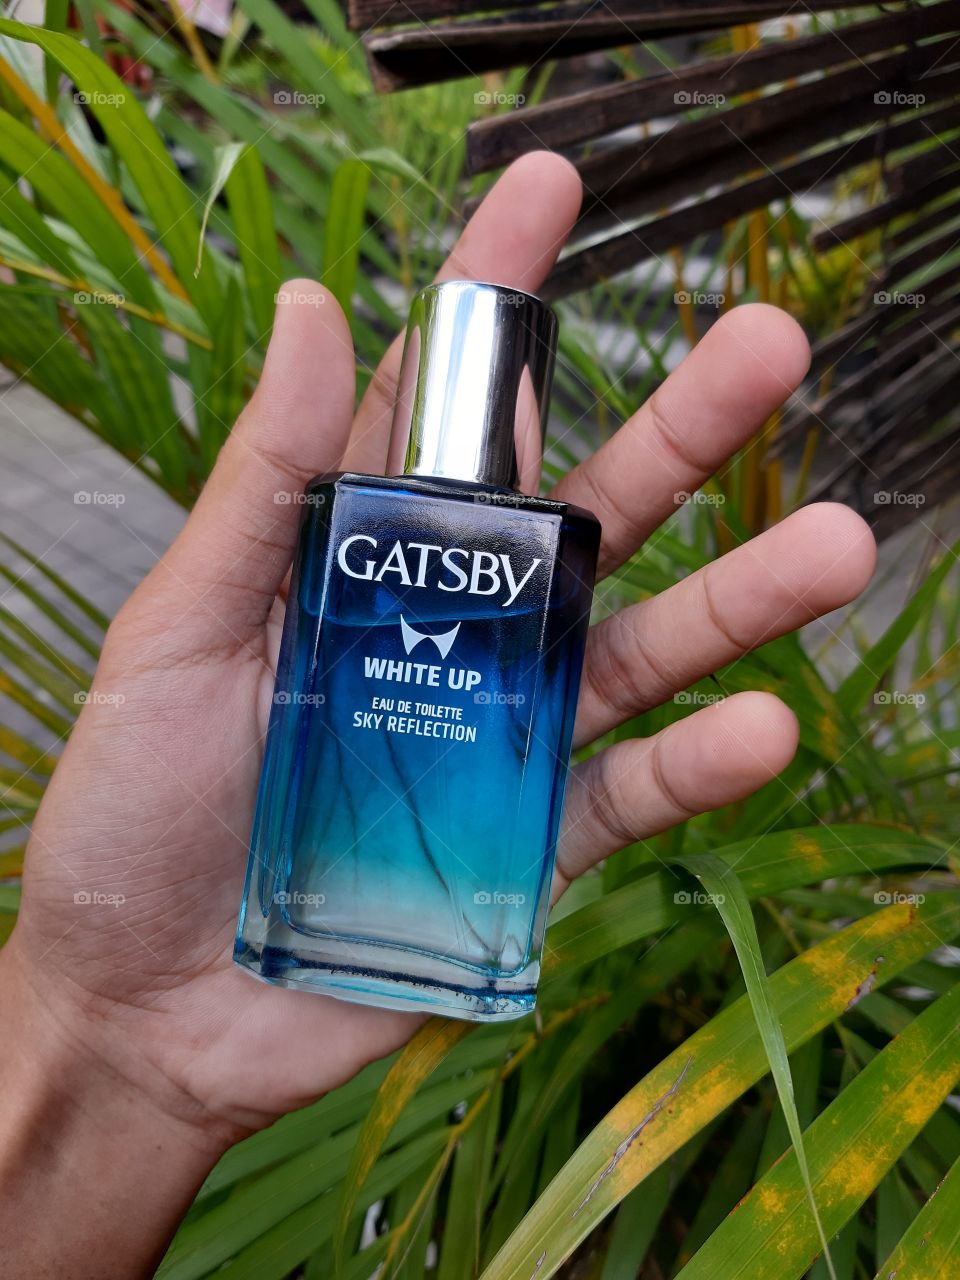 A blue parfume bottle in a hand. Parfum is a must for men and women in terms of fashion.